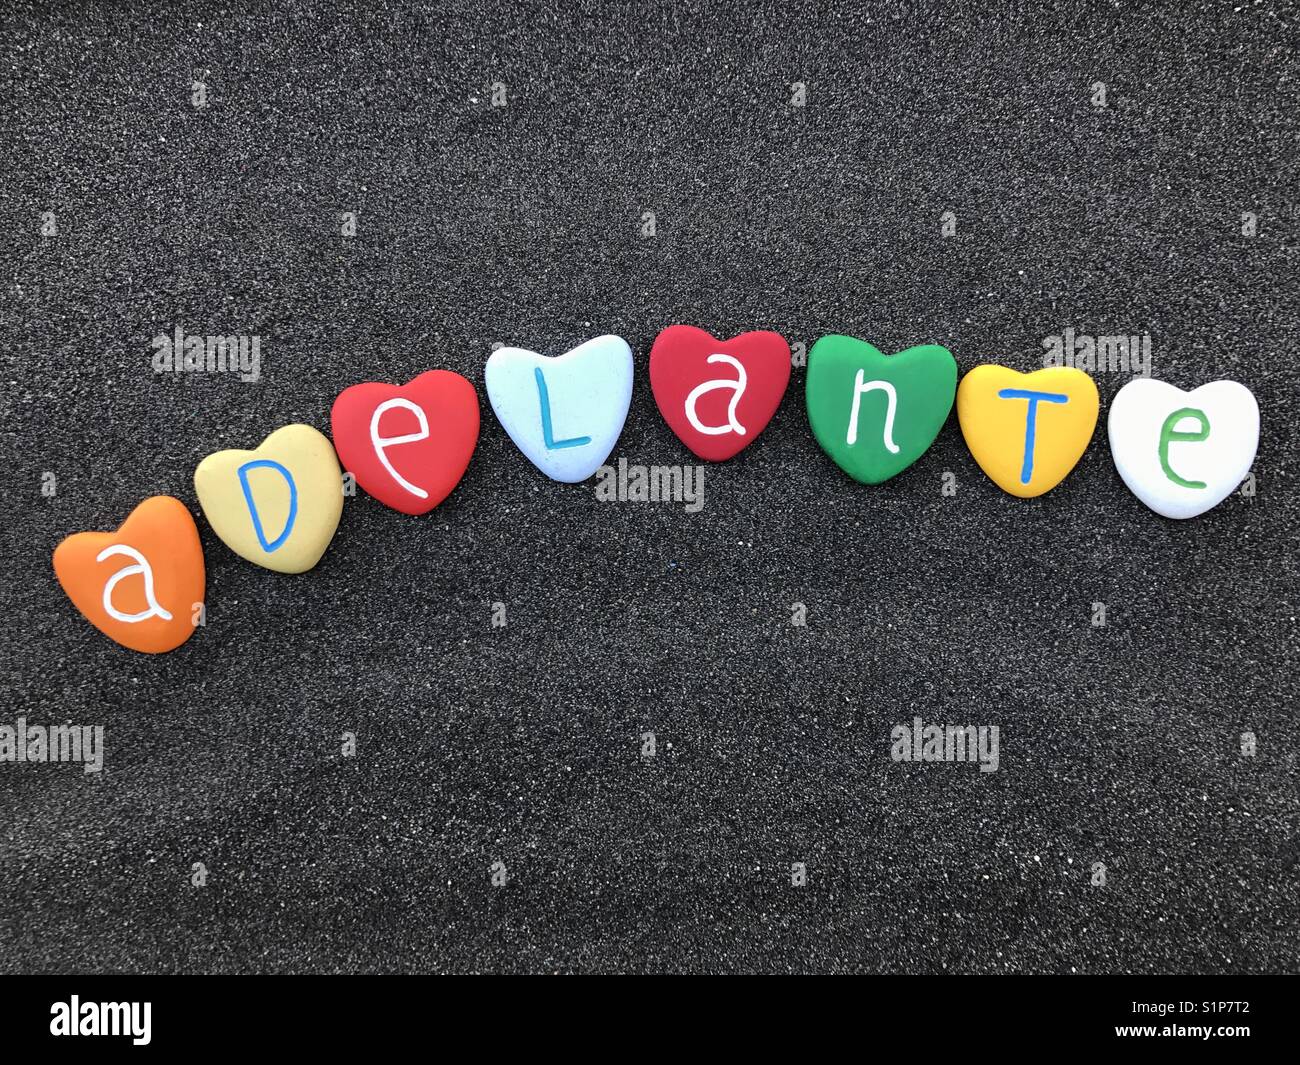 Adelante, spanish word meaning ahead composed on black volcanic sand with colored stone hearts Stock Photo